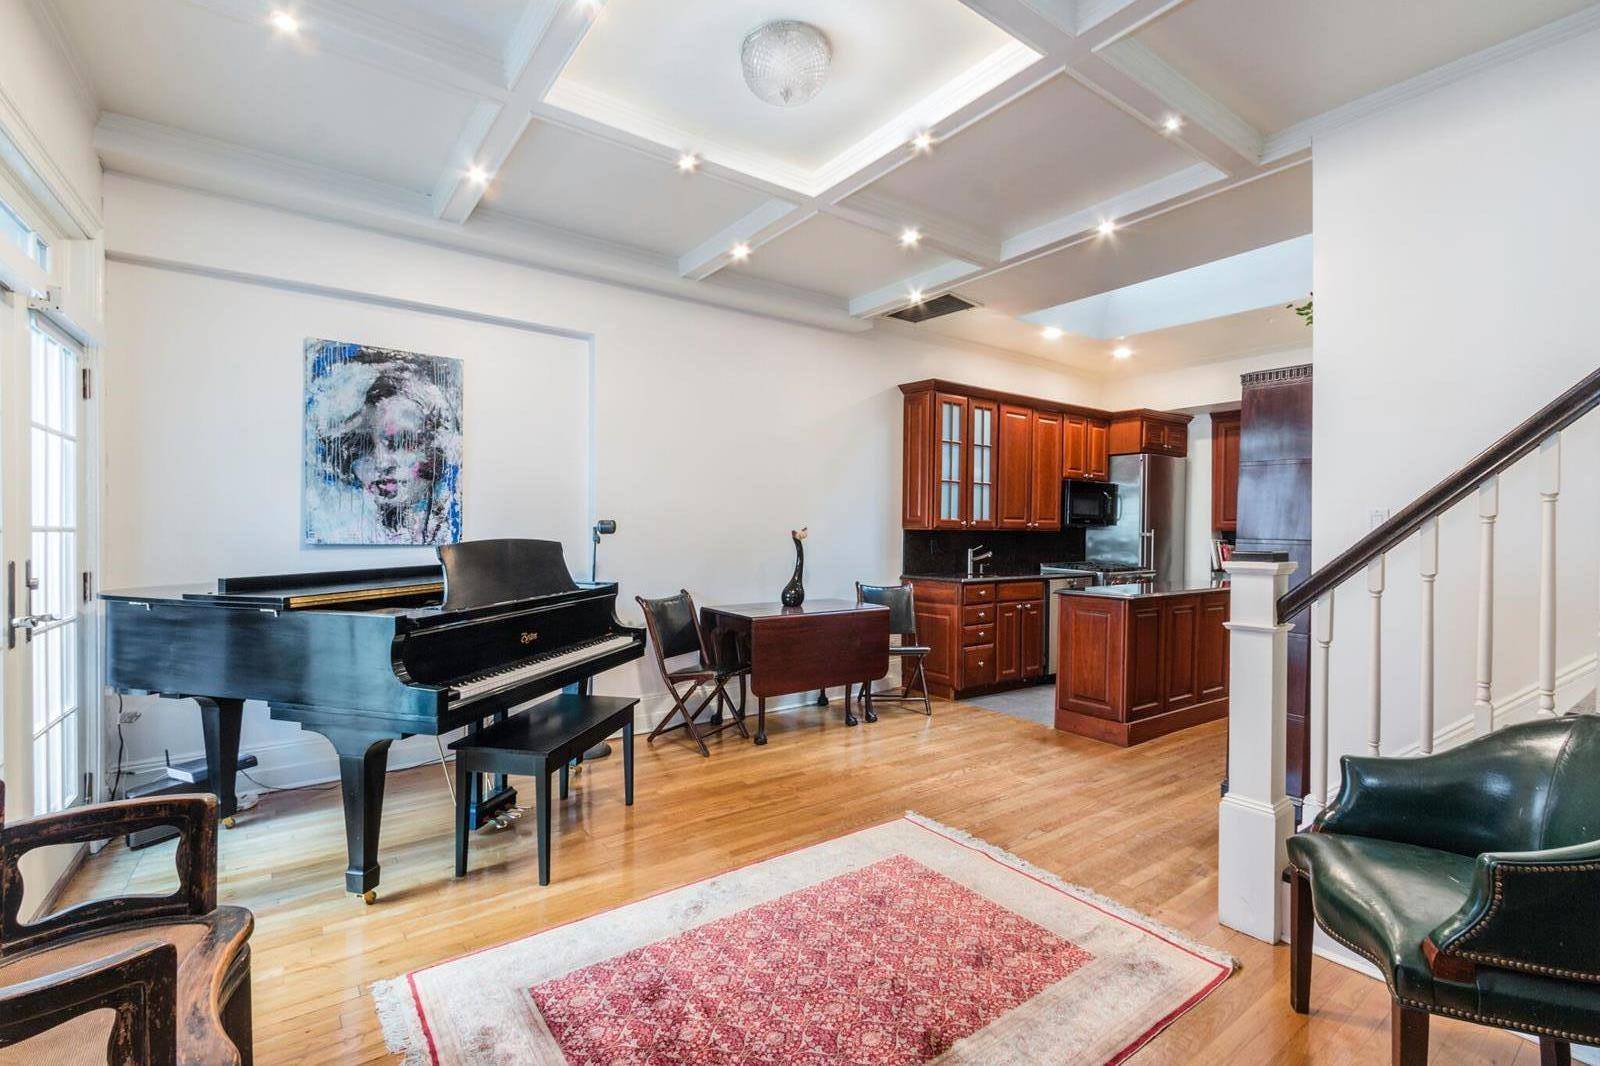 Rare and extraordinary two bedroom two bath duplex penthouse features an exceptional terrace atop a townhouse once owned by Marc Chagall.